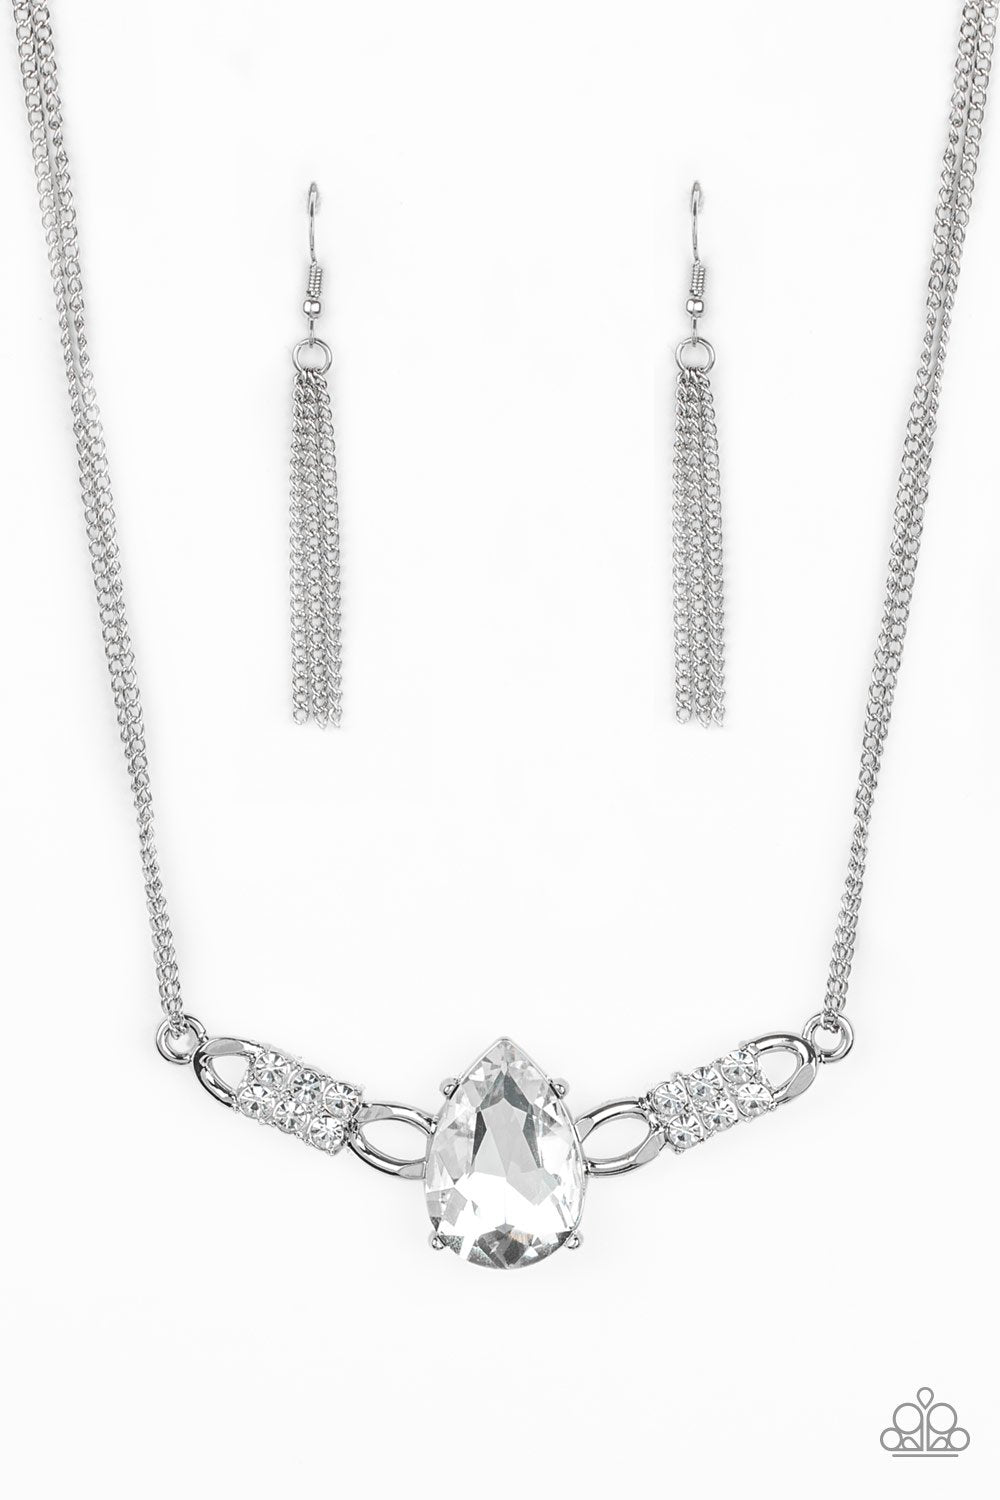 Way To Make An Entrance Silver and White Rhinestone Necklace - Paparazzi Accessories-CarasShop.com - $5 Jewelry by Cara Jewels